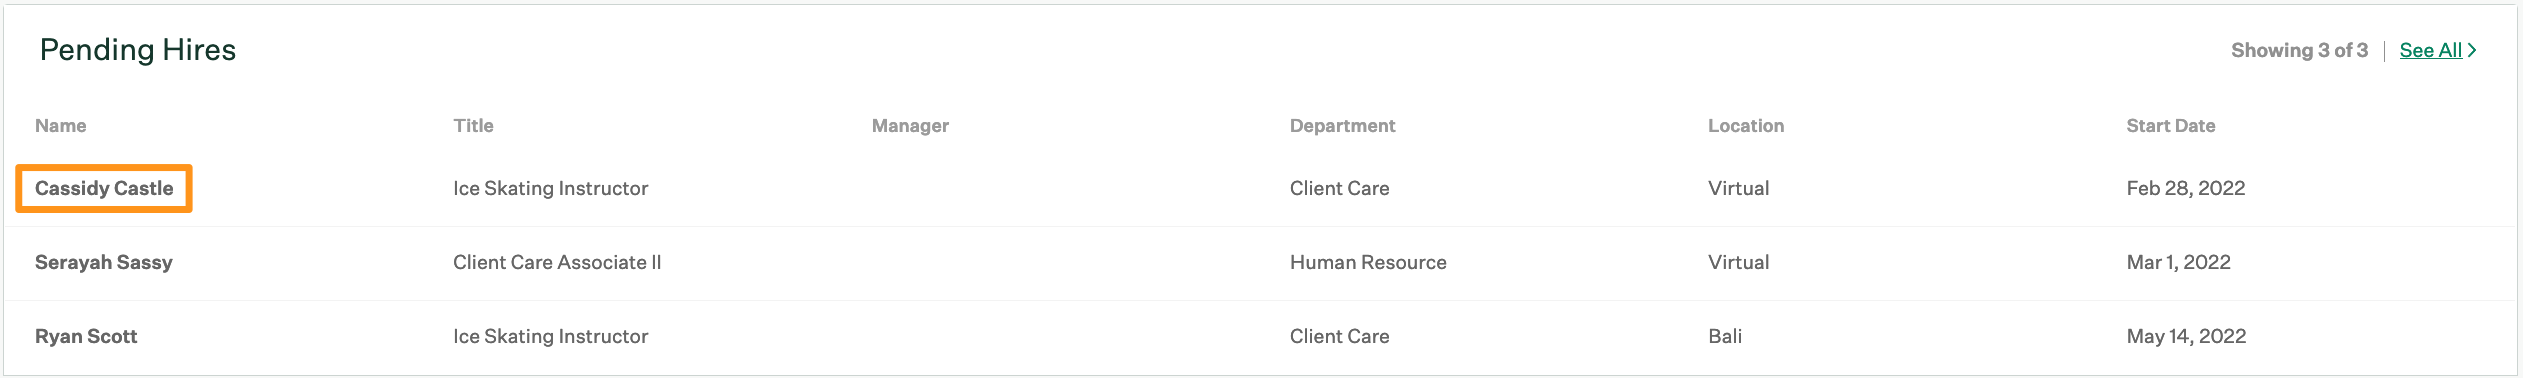 Screenshot  of  the  pending  hires  section.  